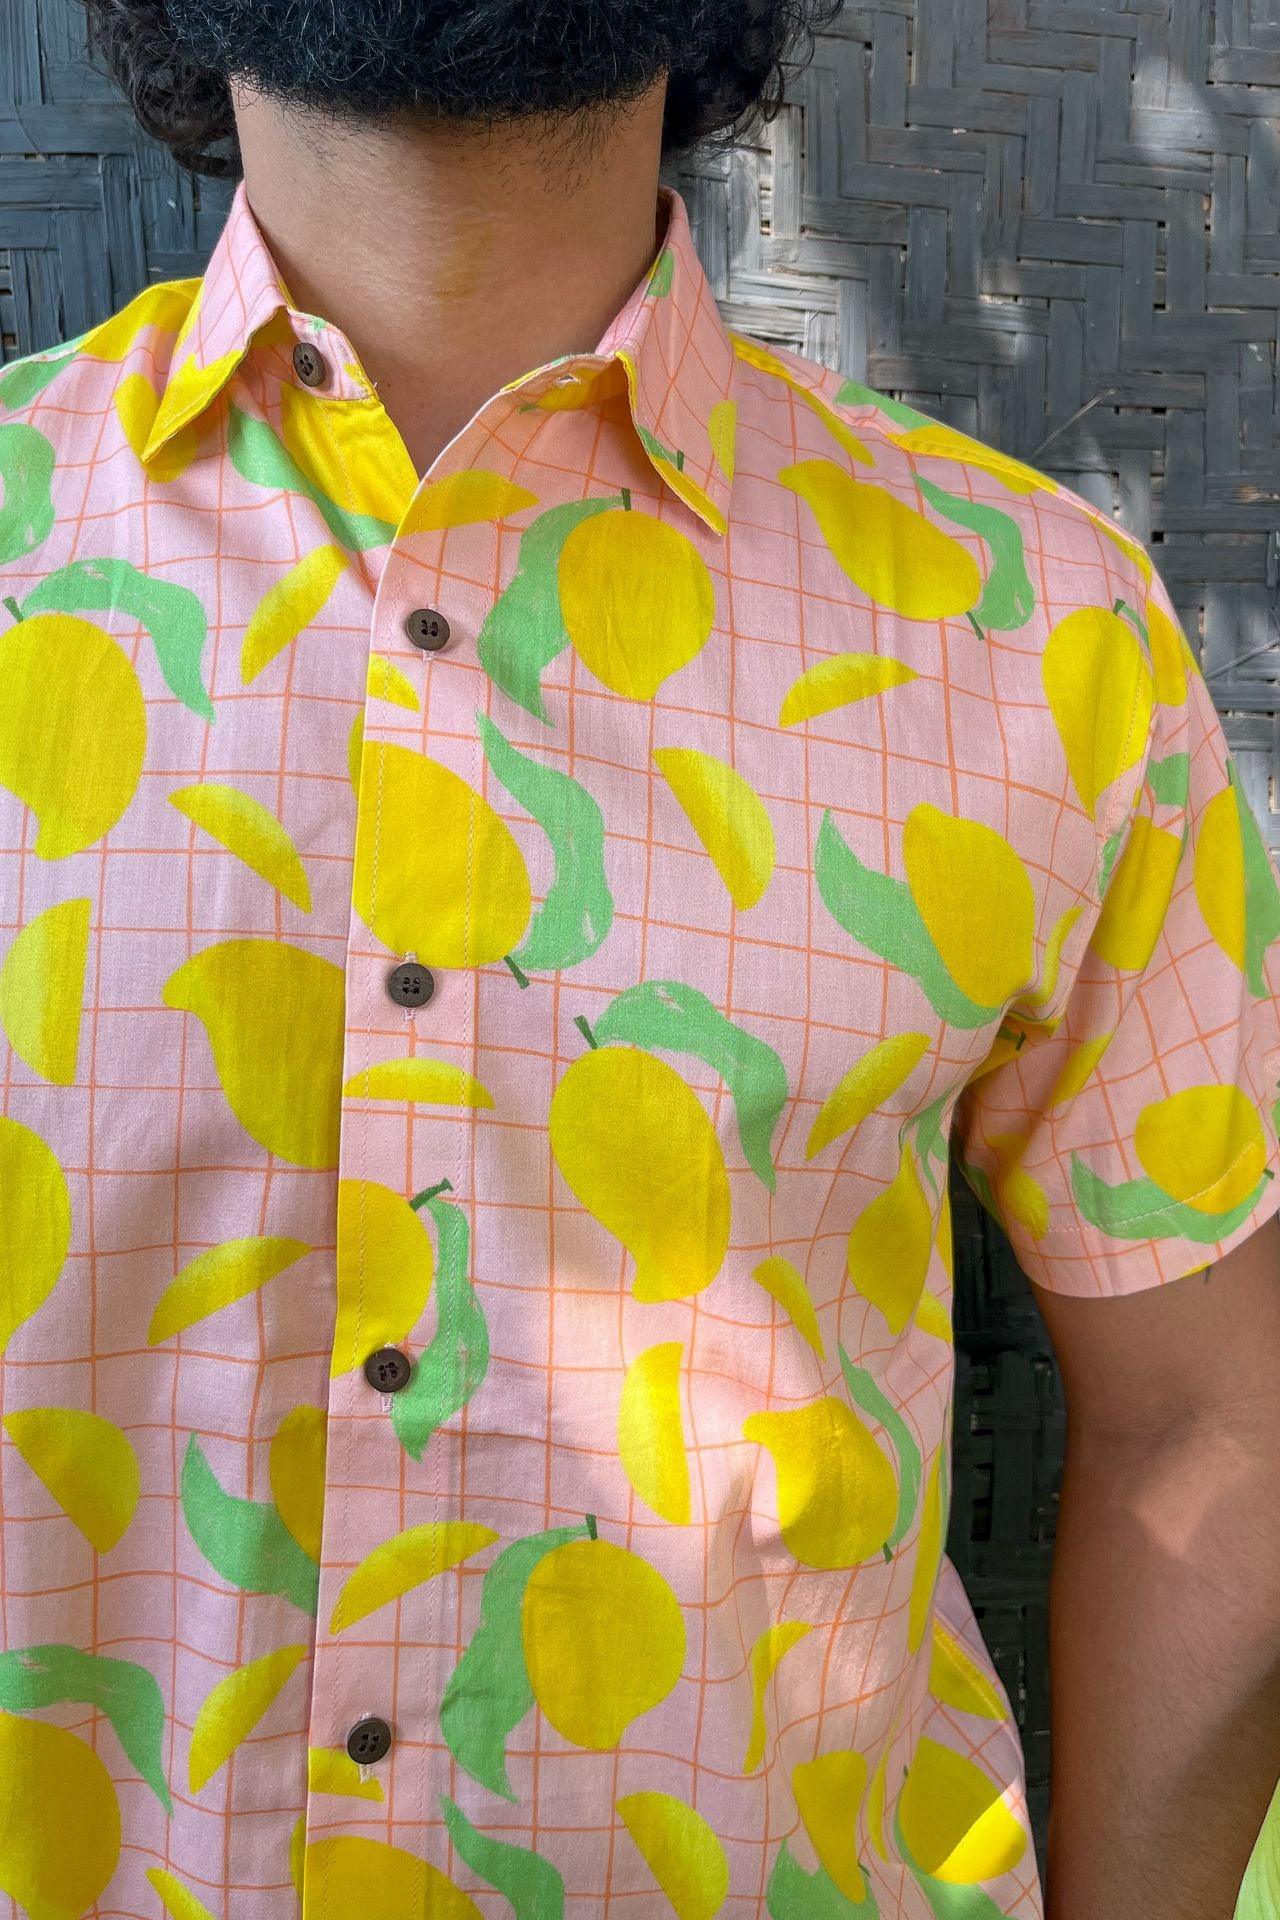 Mango Print Organic Cotton Shirt from Goa - The perfect Sunday Brunch Shirt does exist and you'll find it online at Siesta o'Clock